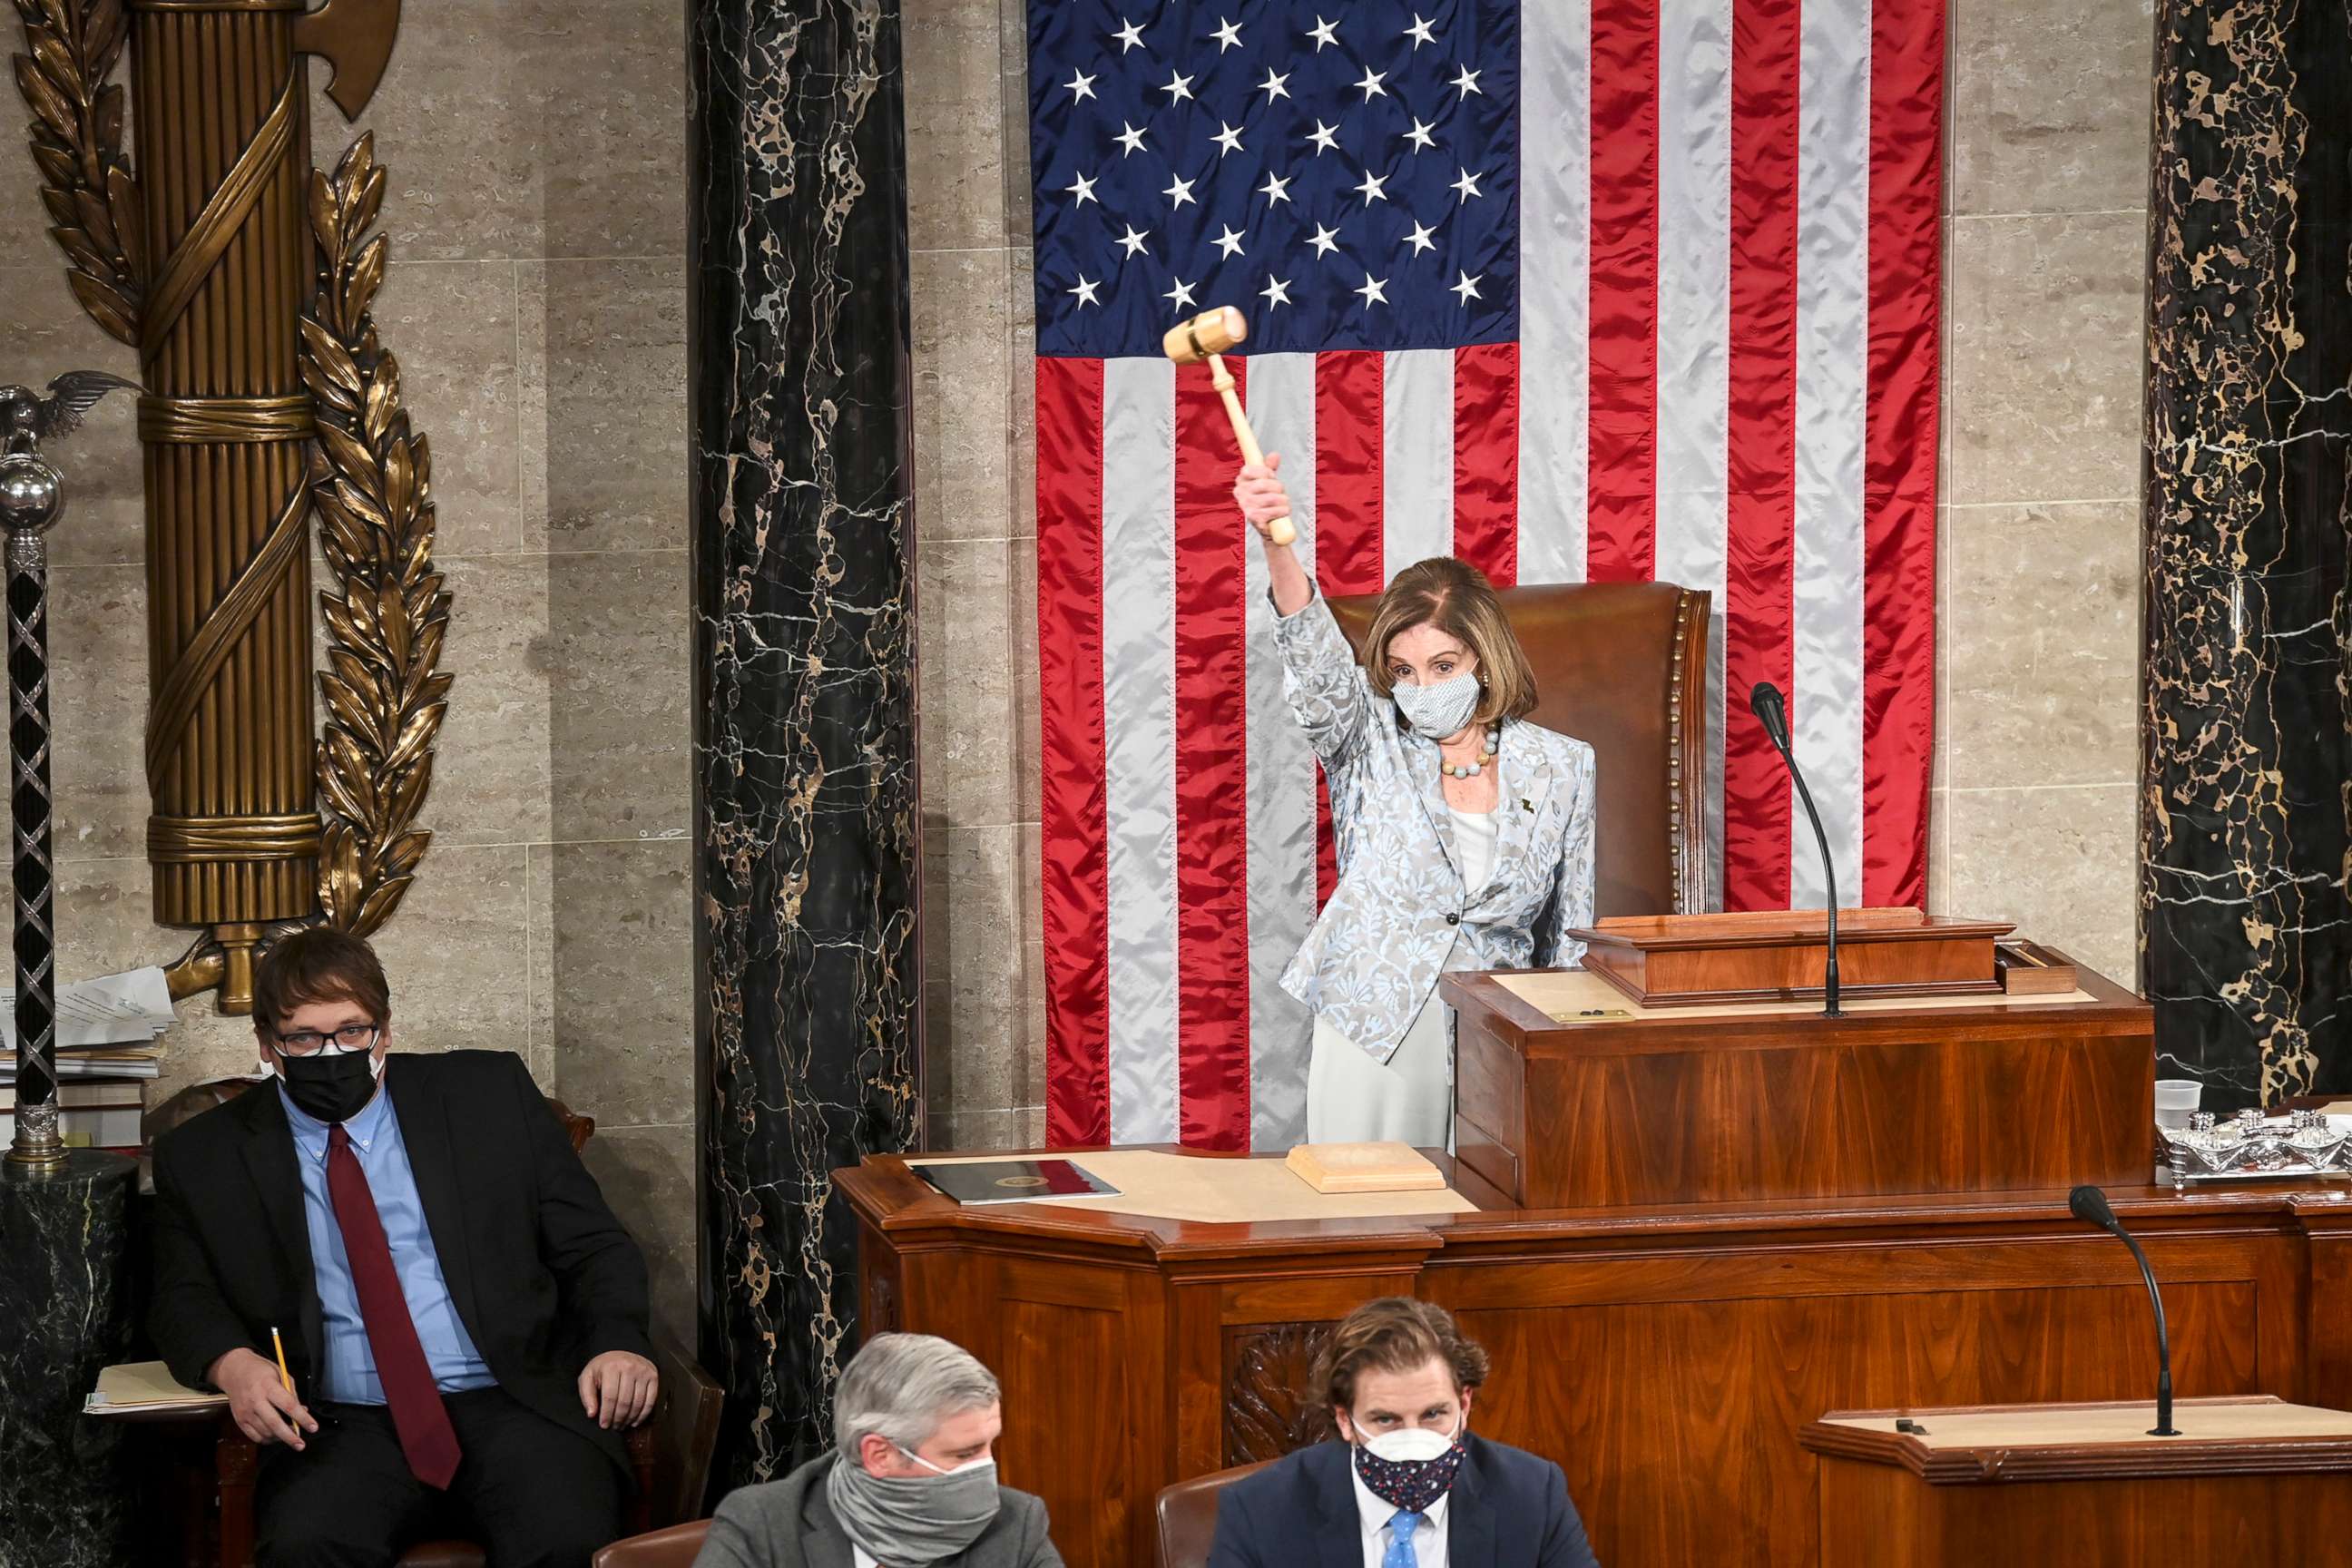 PHOTO: House Speaker Nancy Pelosi presides over the year's opening session on Congress in Washington, Jan. 3, 2021.